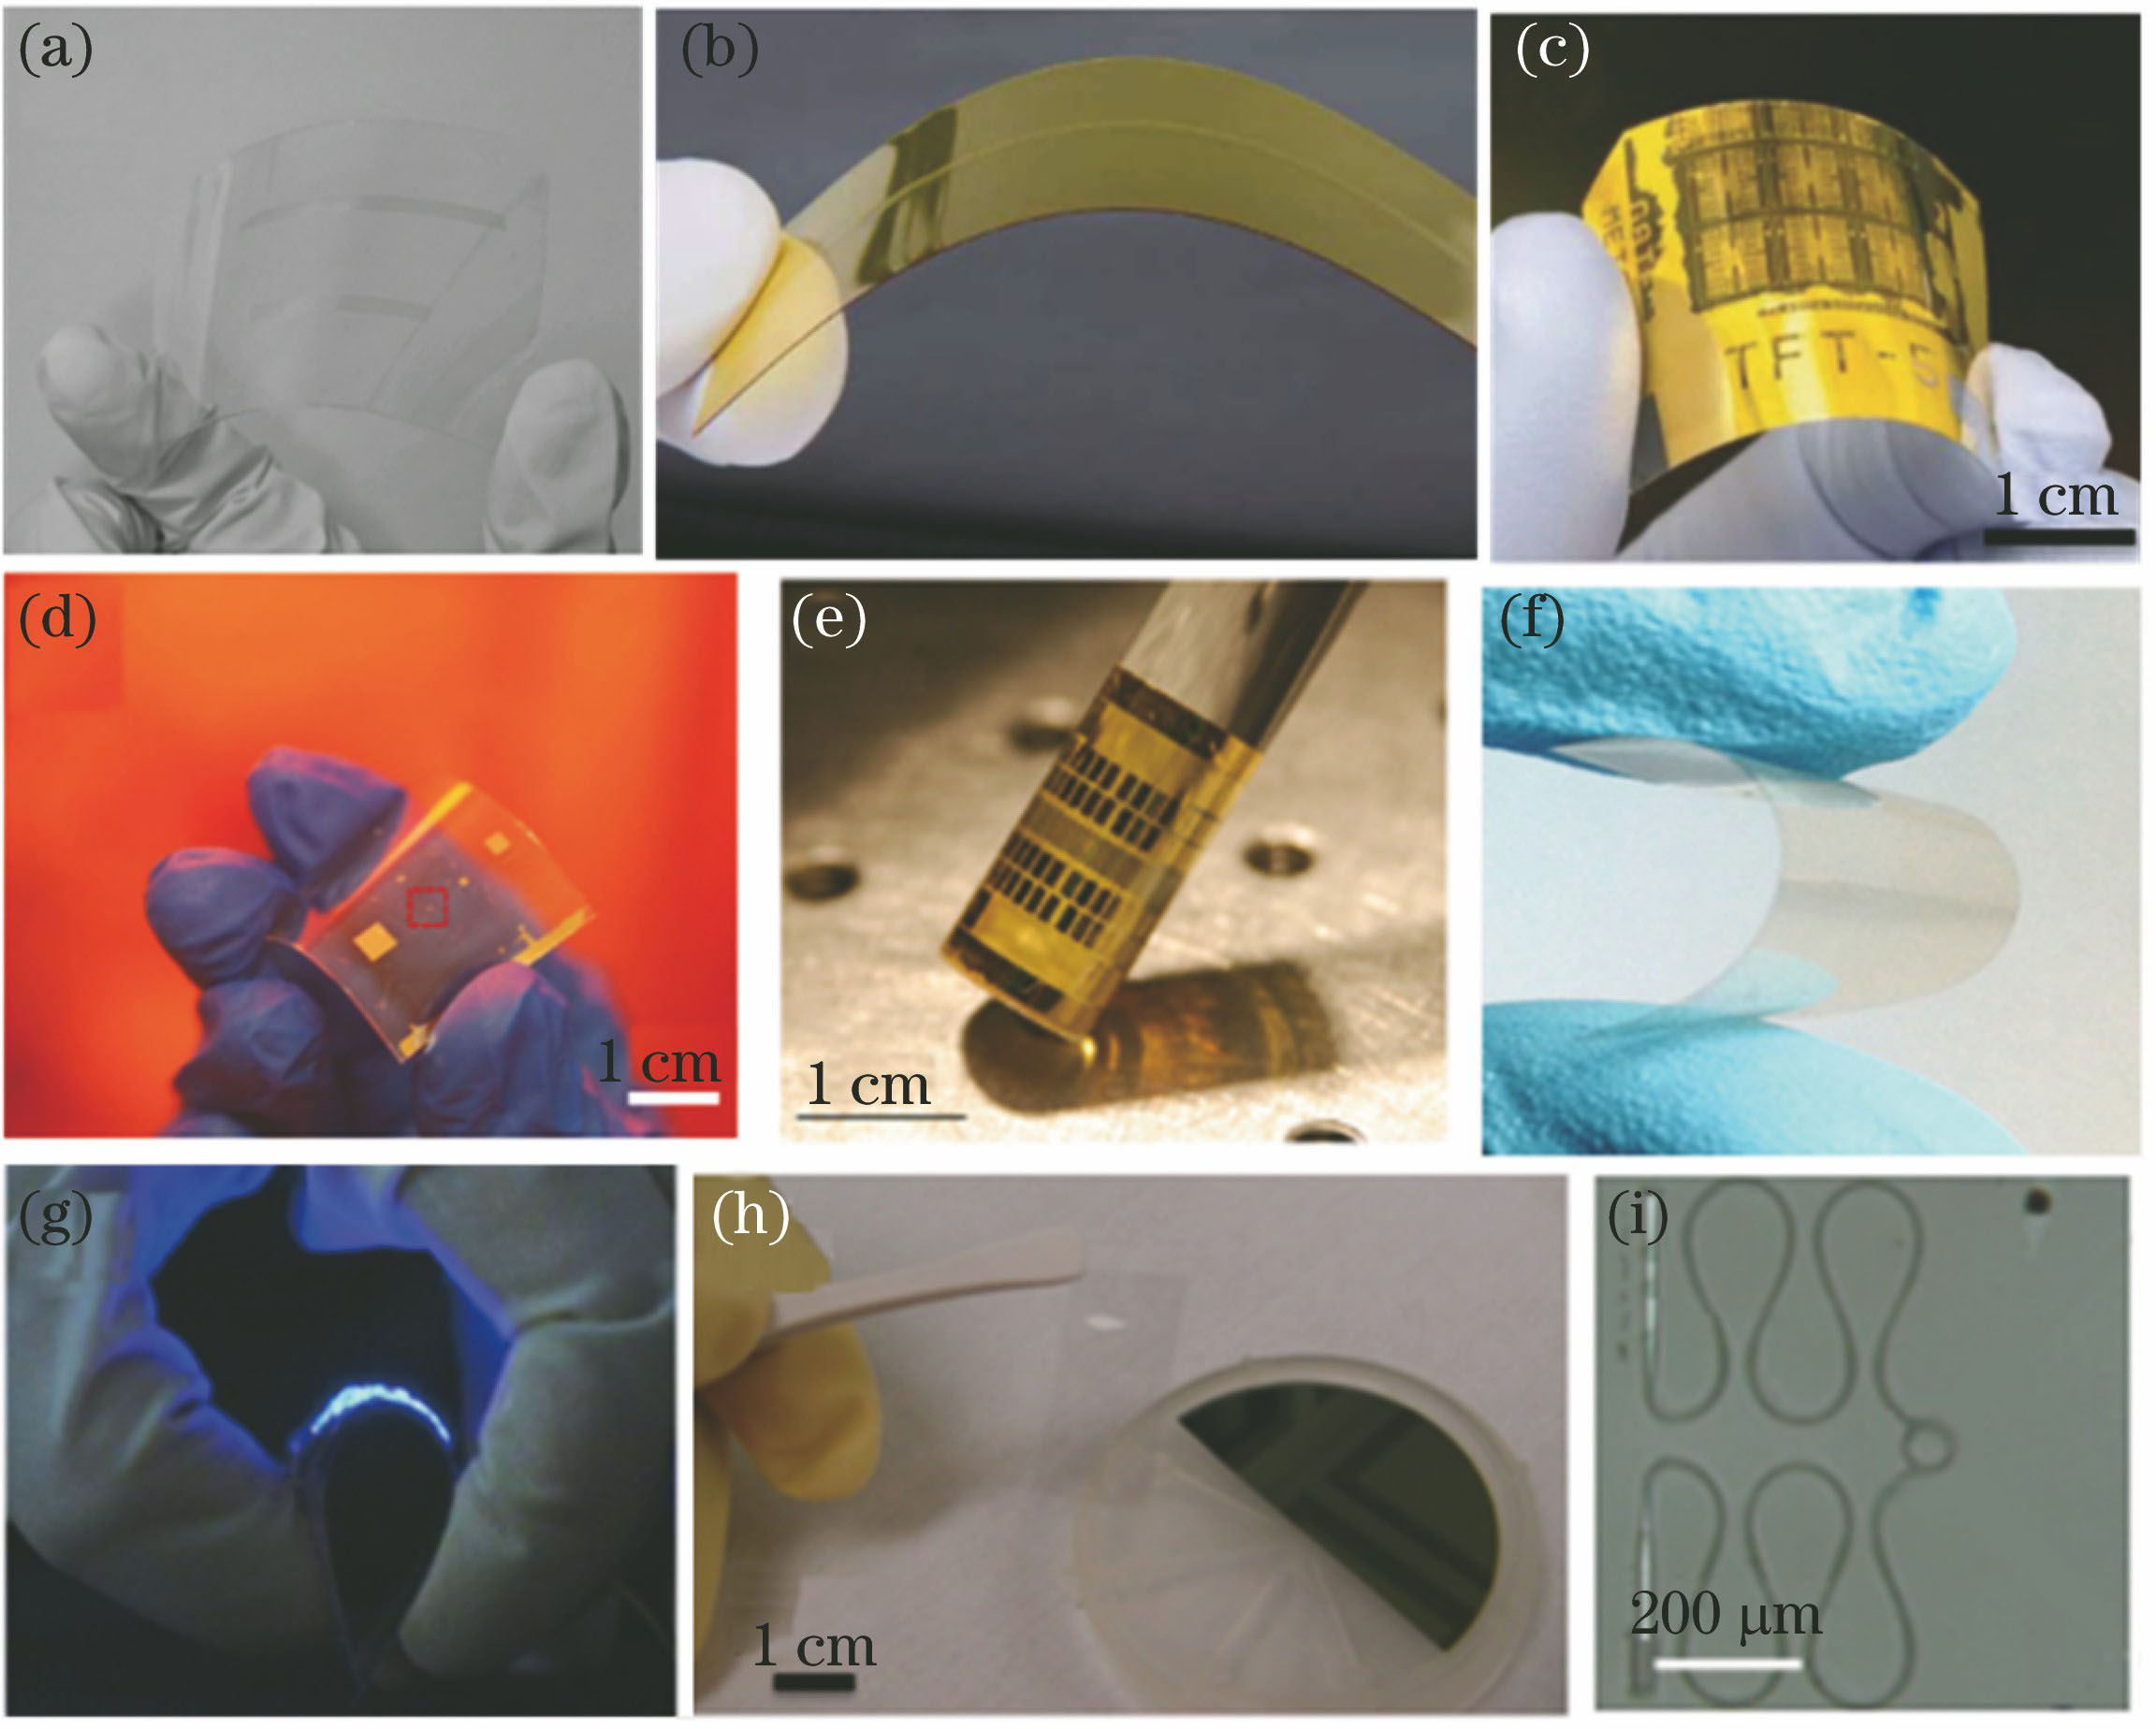 Flexible photonic devices based on different materials. (a) Flexible polymer waveguide cladded in PDMS[25]; (b) flexible optical waveguide cladded in PI[26]; (c) flexible Si NM phototransistor[34]; (d) array of Ge NM MSM photodiodes on PET substrate[75]; (e) 8 × 100 thin-film InGaAs p-i-n photodiode